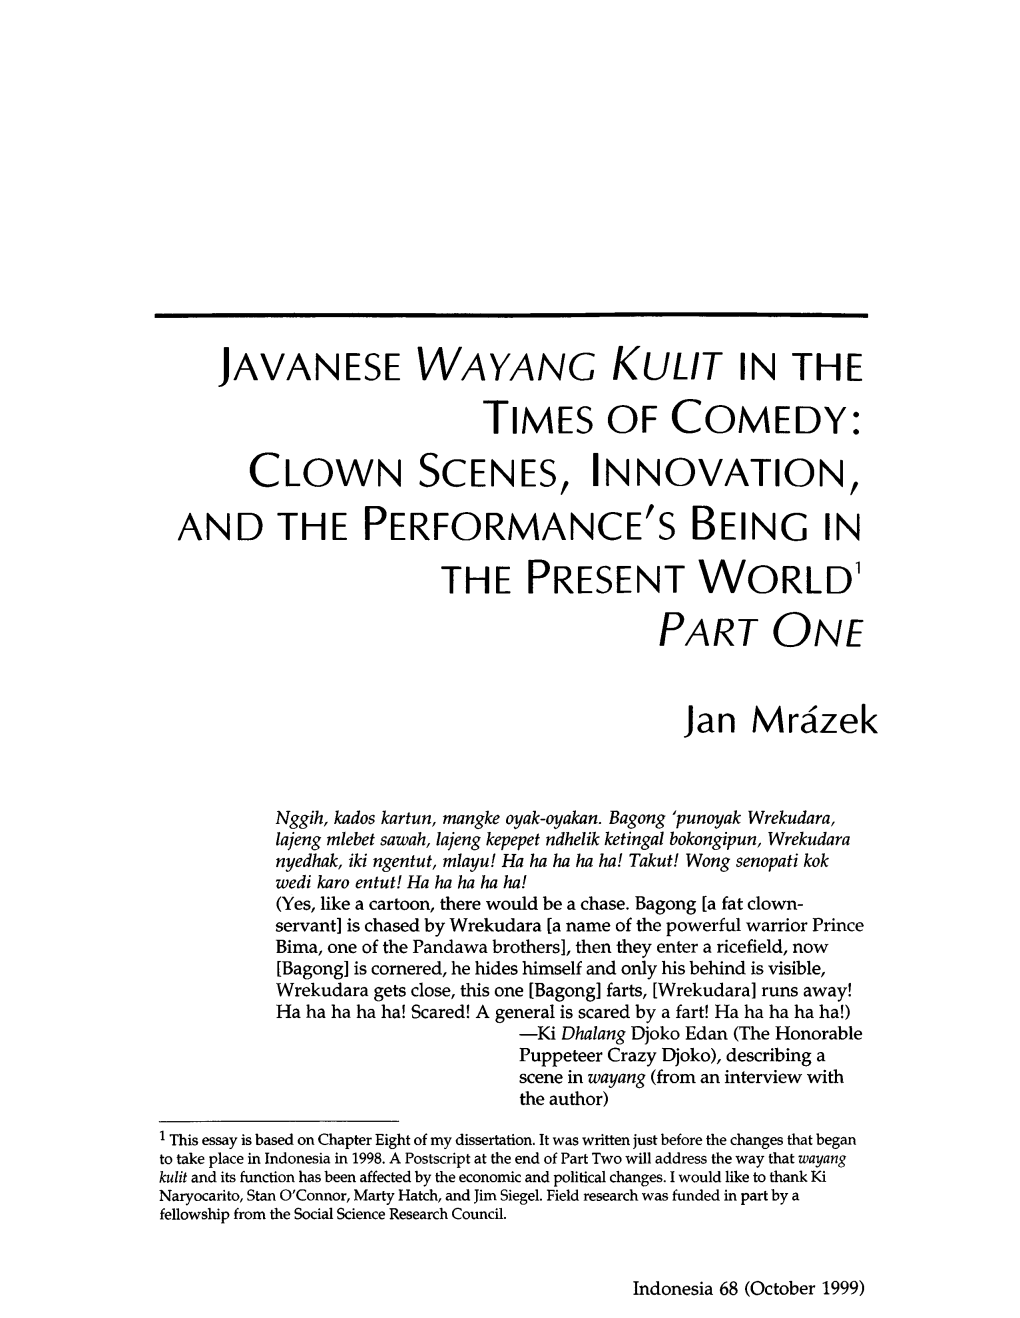 Wayang Kulit in the Times of Comedy: C Lown Scenes, Innovation, and the Performance's Being in the Present World1 Part One Jan Mrazek